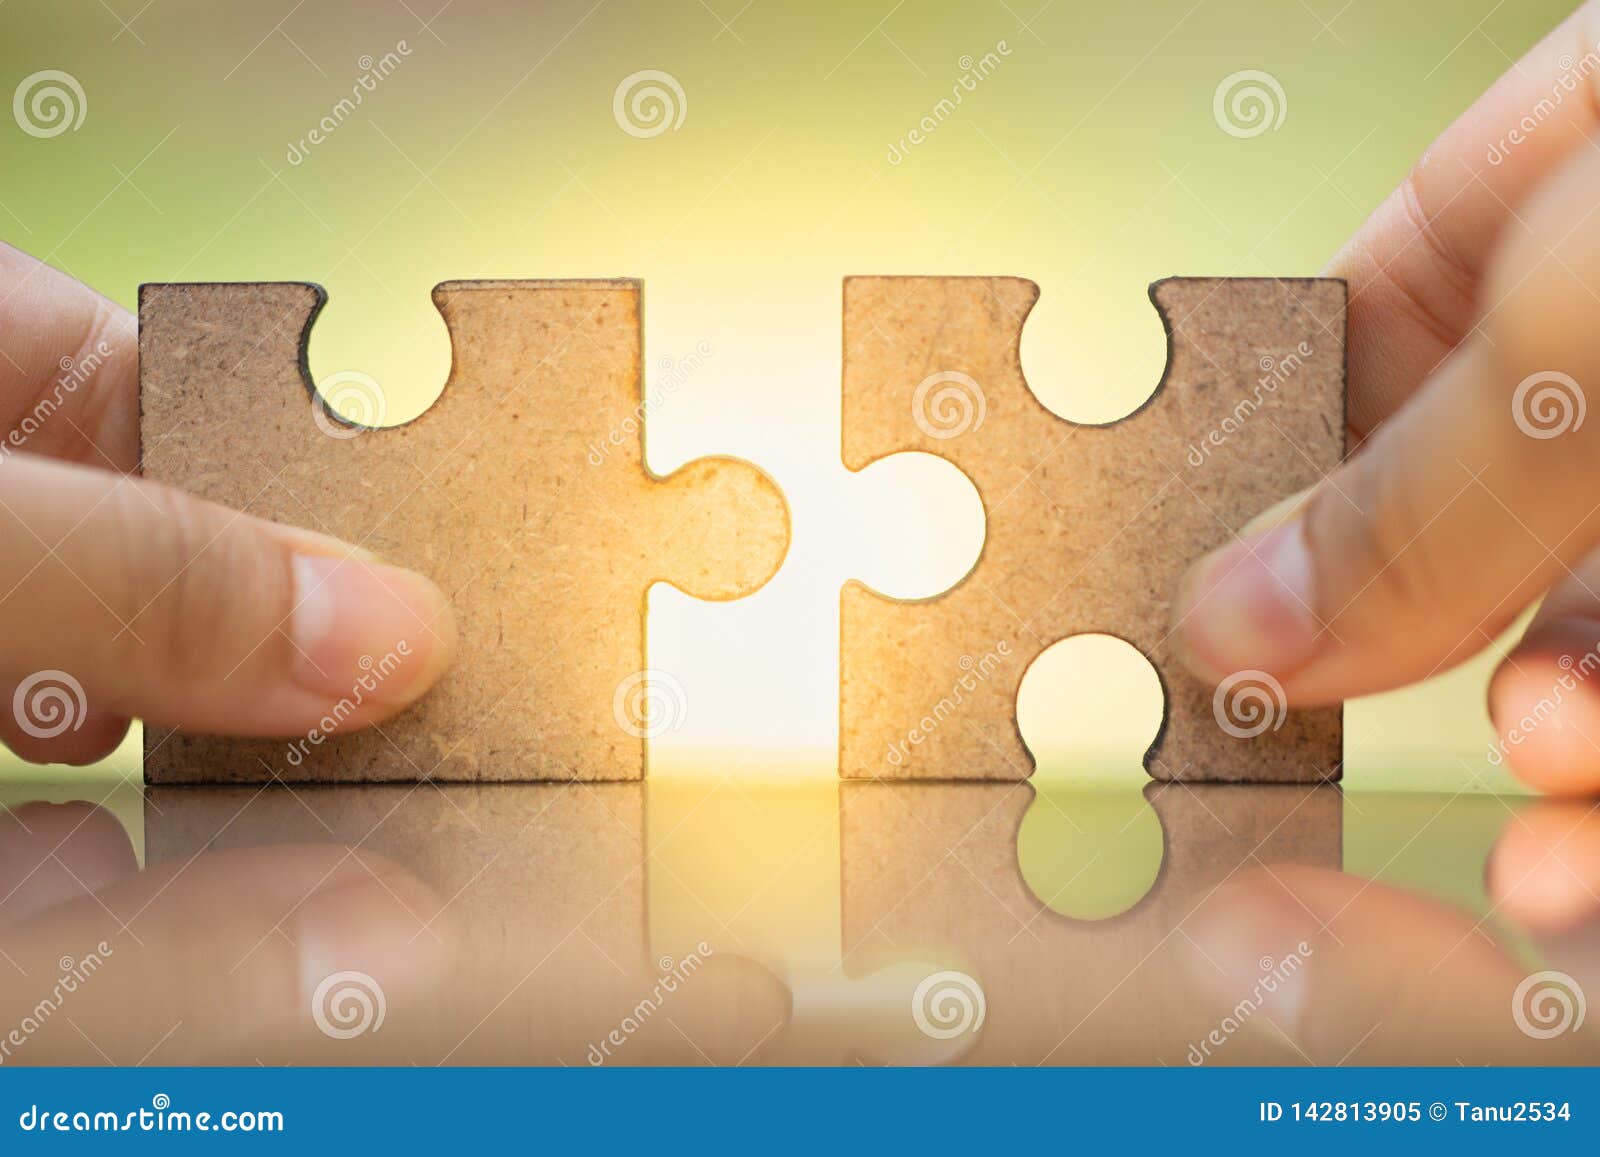 woman`s hand holding and connecting jigsaw puzzles.